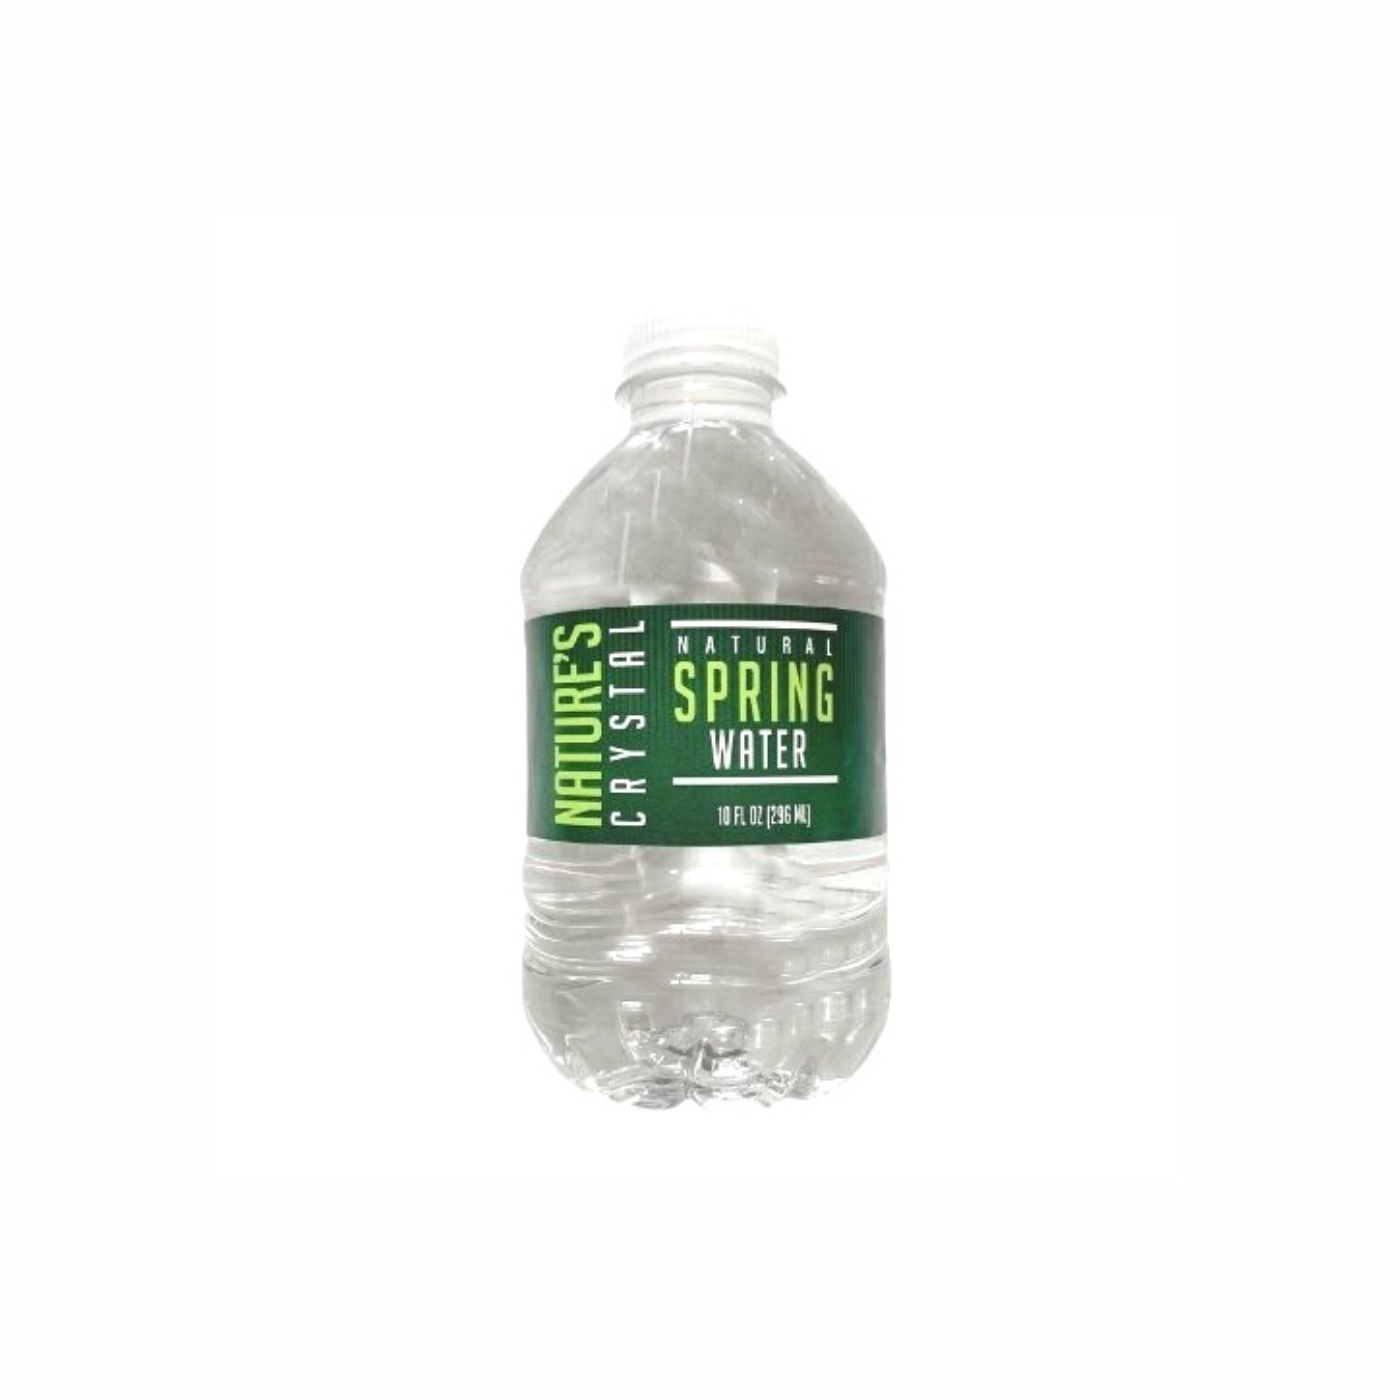 MARKET NATURE IS HOME WATER BOTTLE